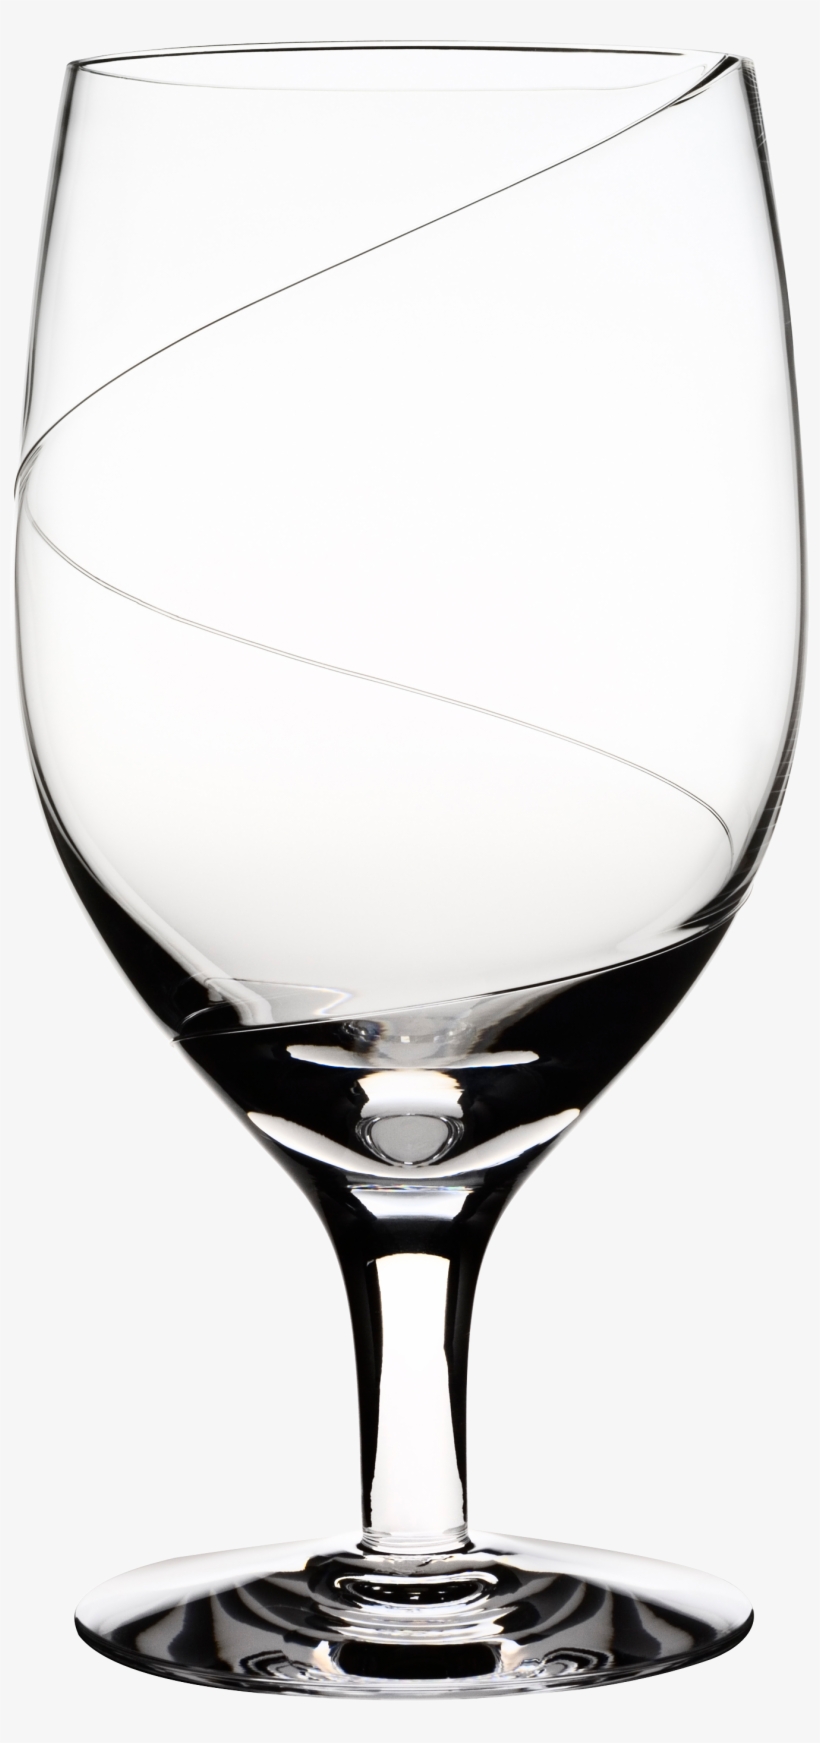 Empty Wine Glass Png Image, transparent png #613650